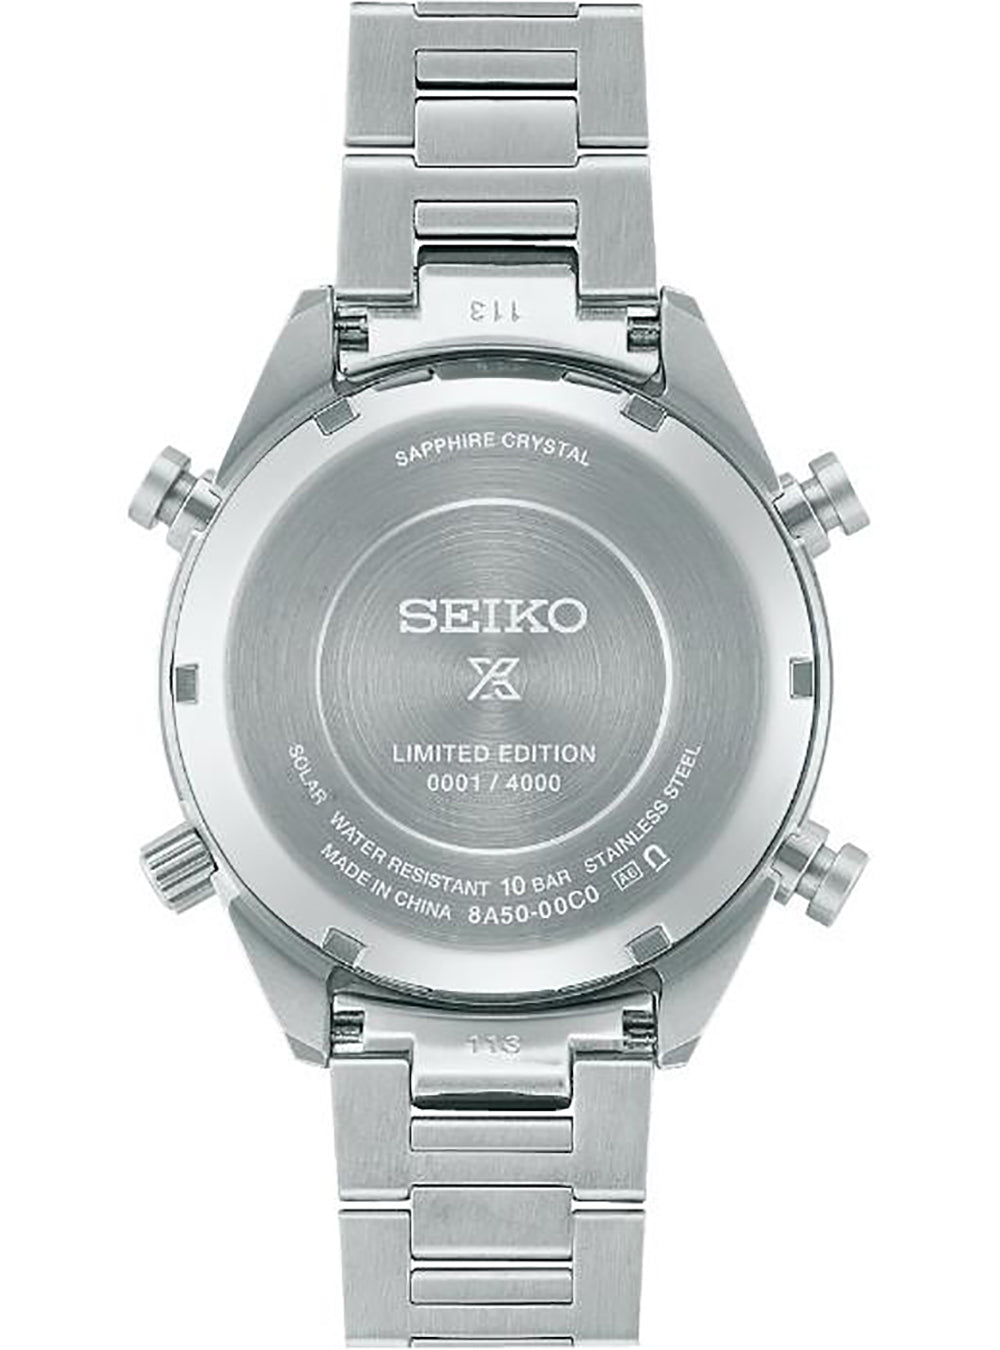 SEIKO PROSPEX SPEEDTIMER40TH ANNIVERSARY SBER005 LIMITED EDITION MADE IN JAPAN JDMWRISTWATCHjapan-select